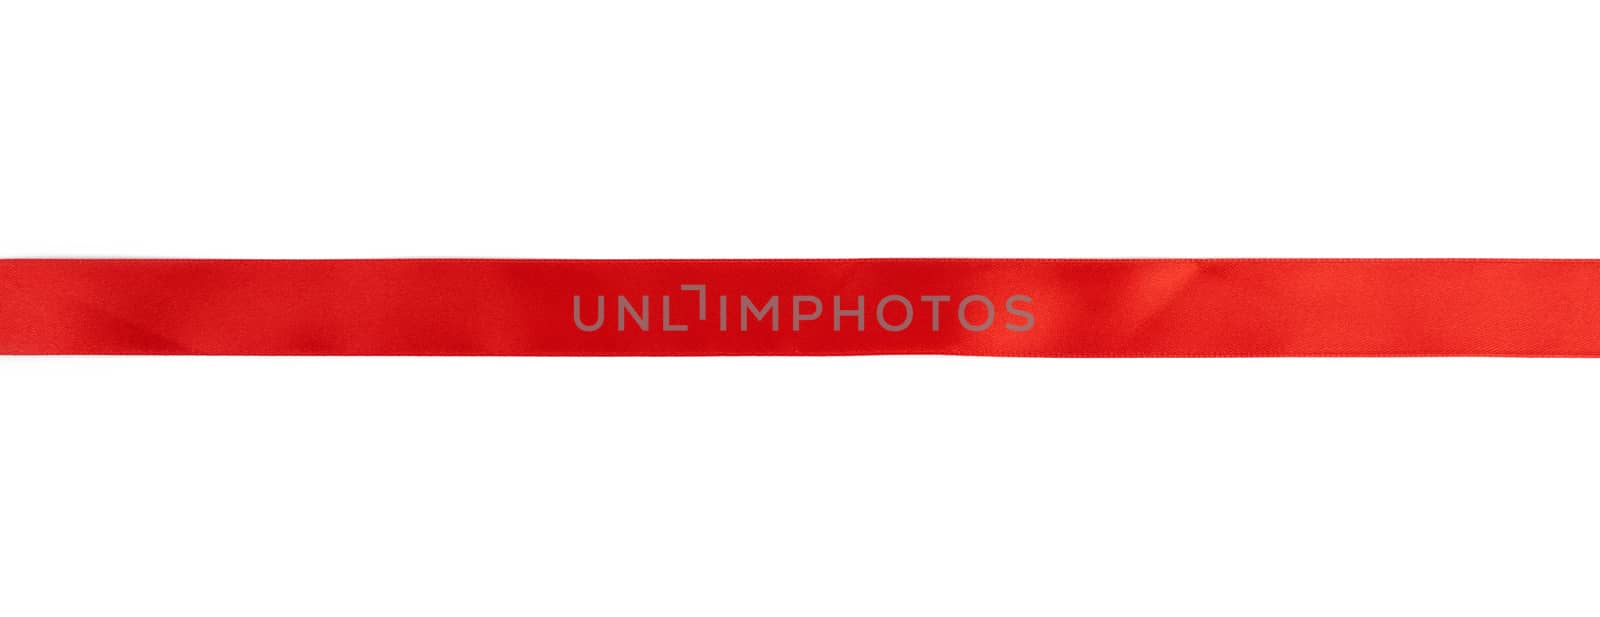 red silk ribbon isolated on white background, design element for by ndanko